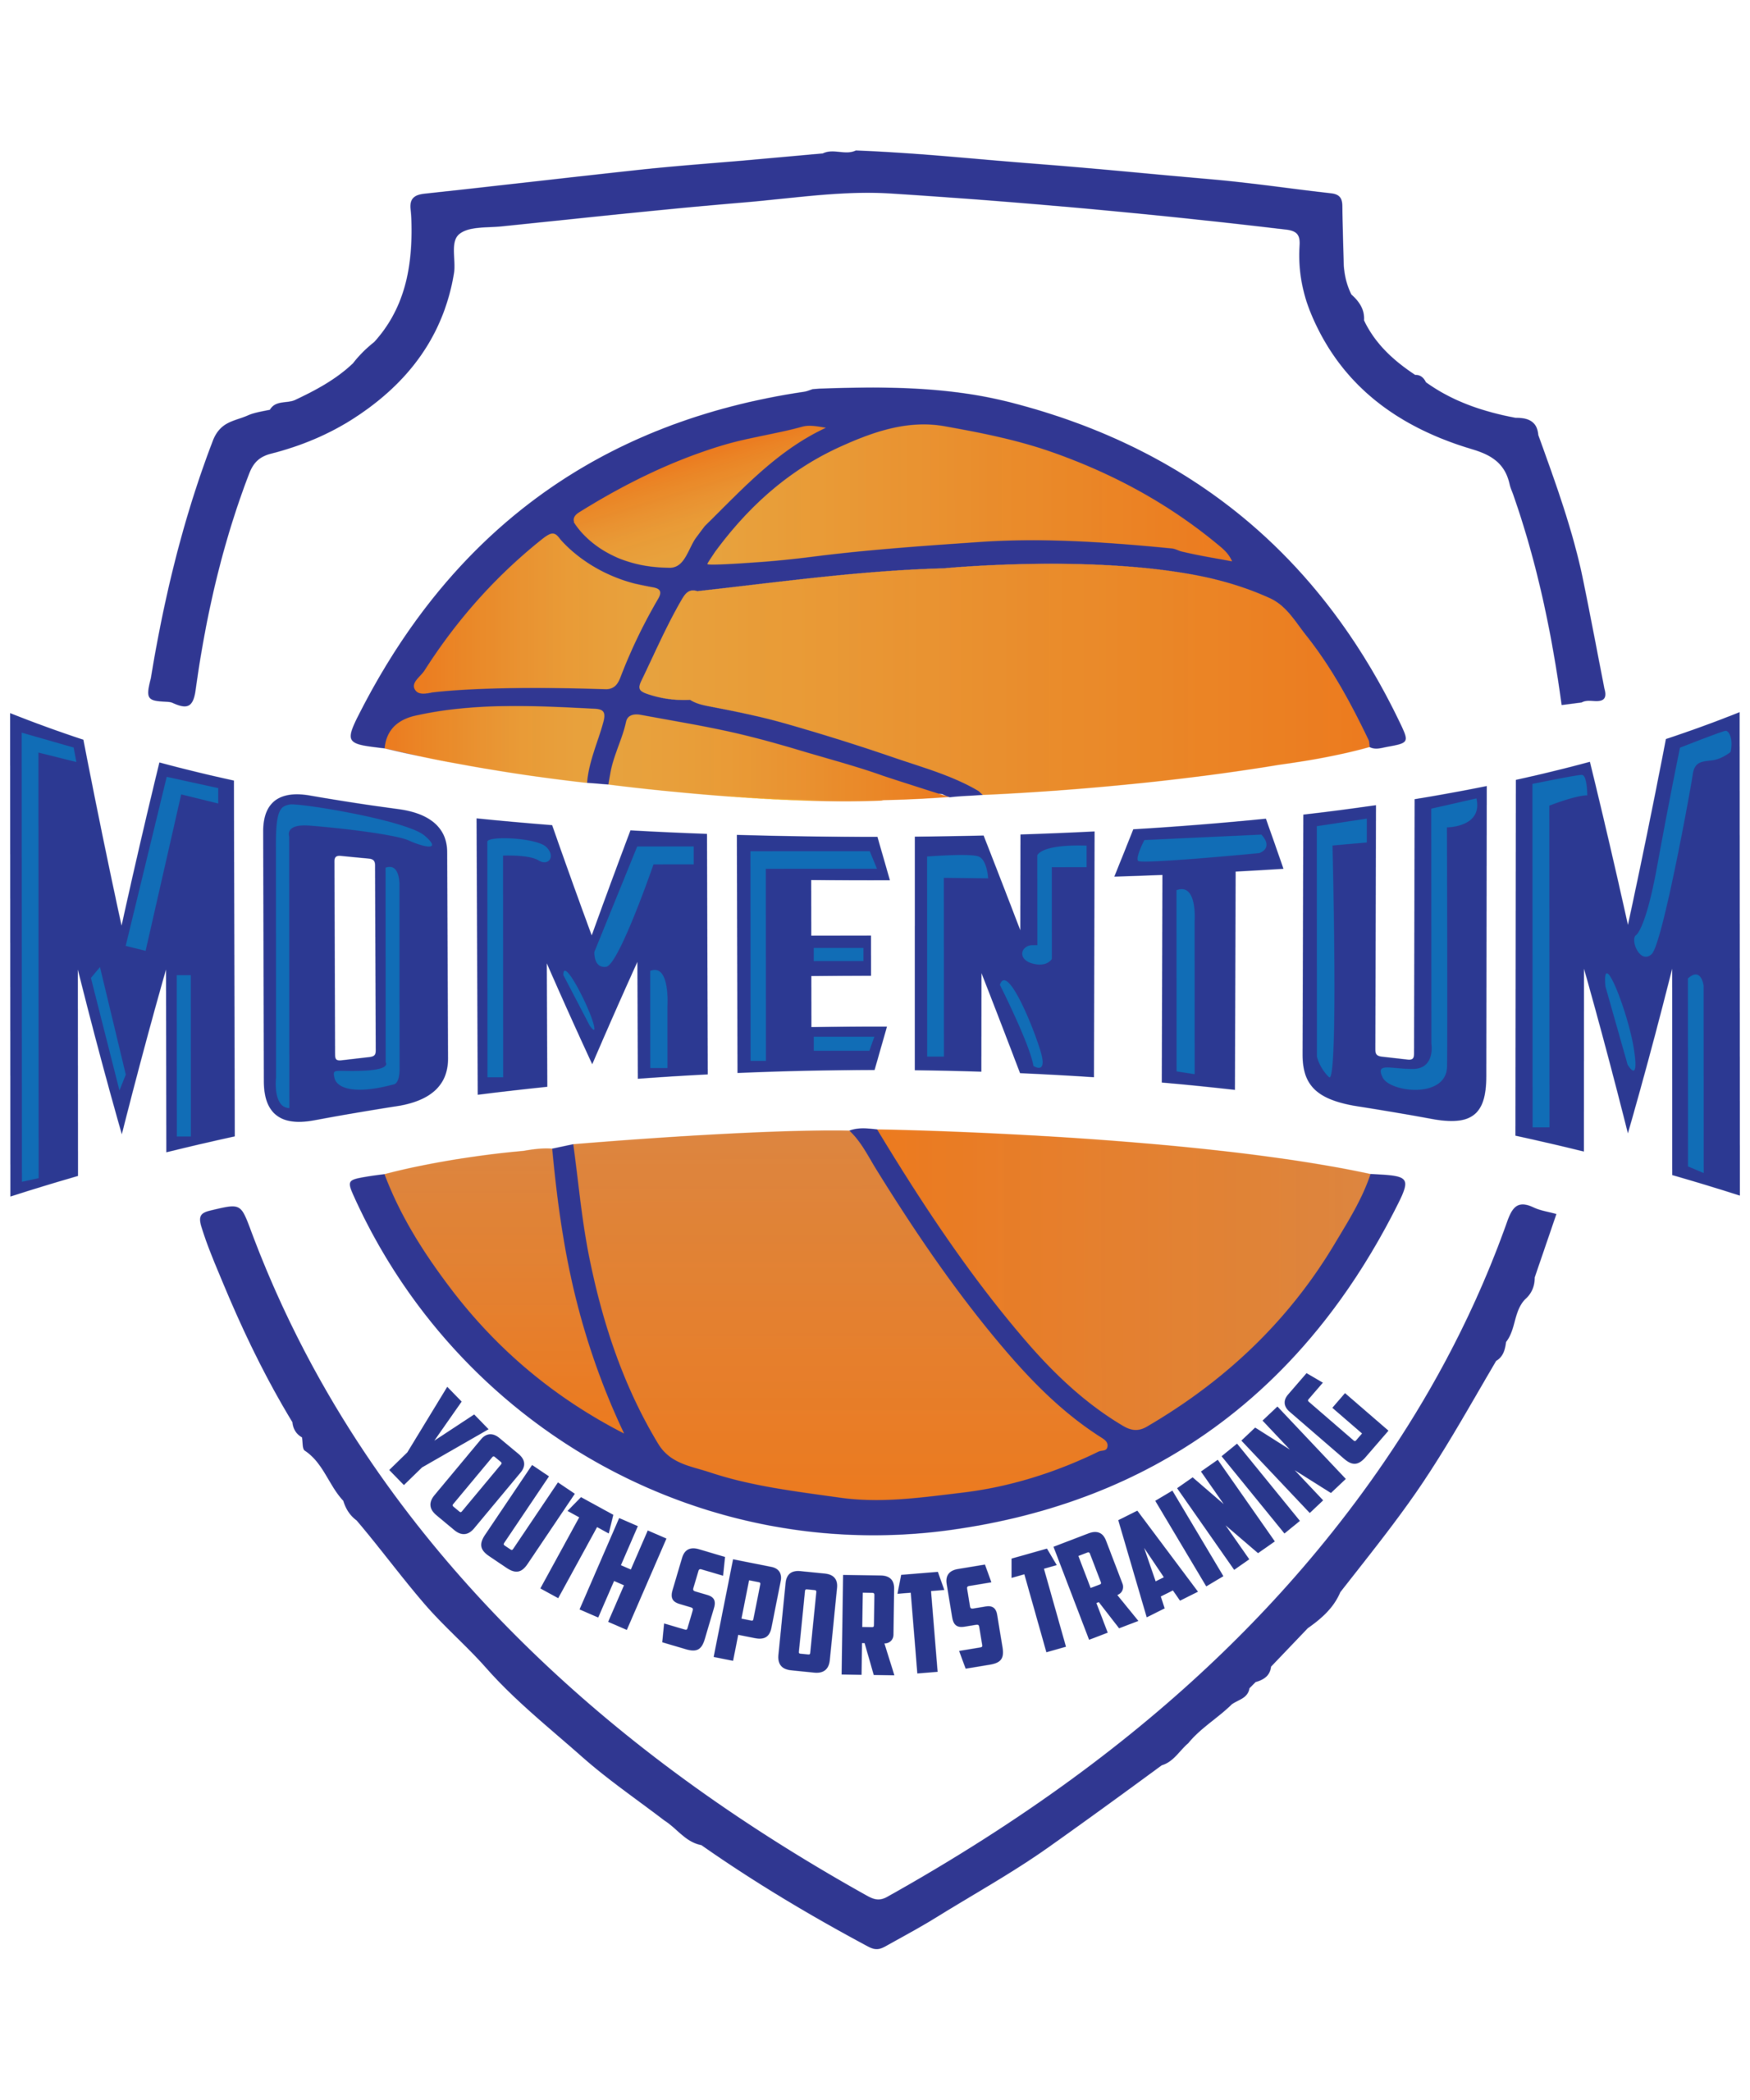 Home - Momentum Youth Sports Training